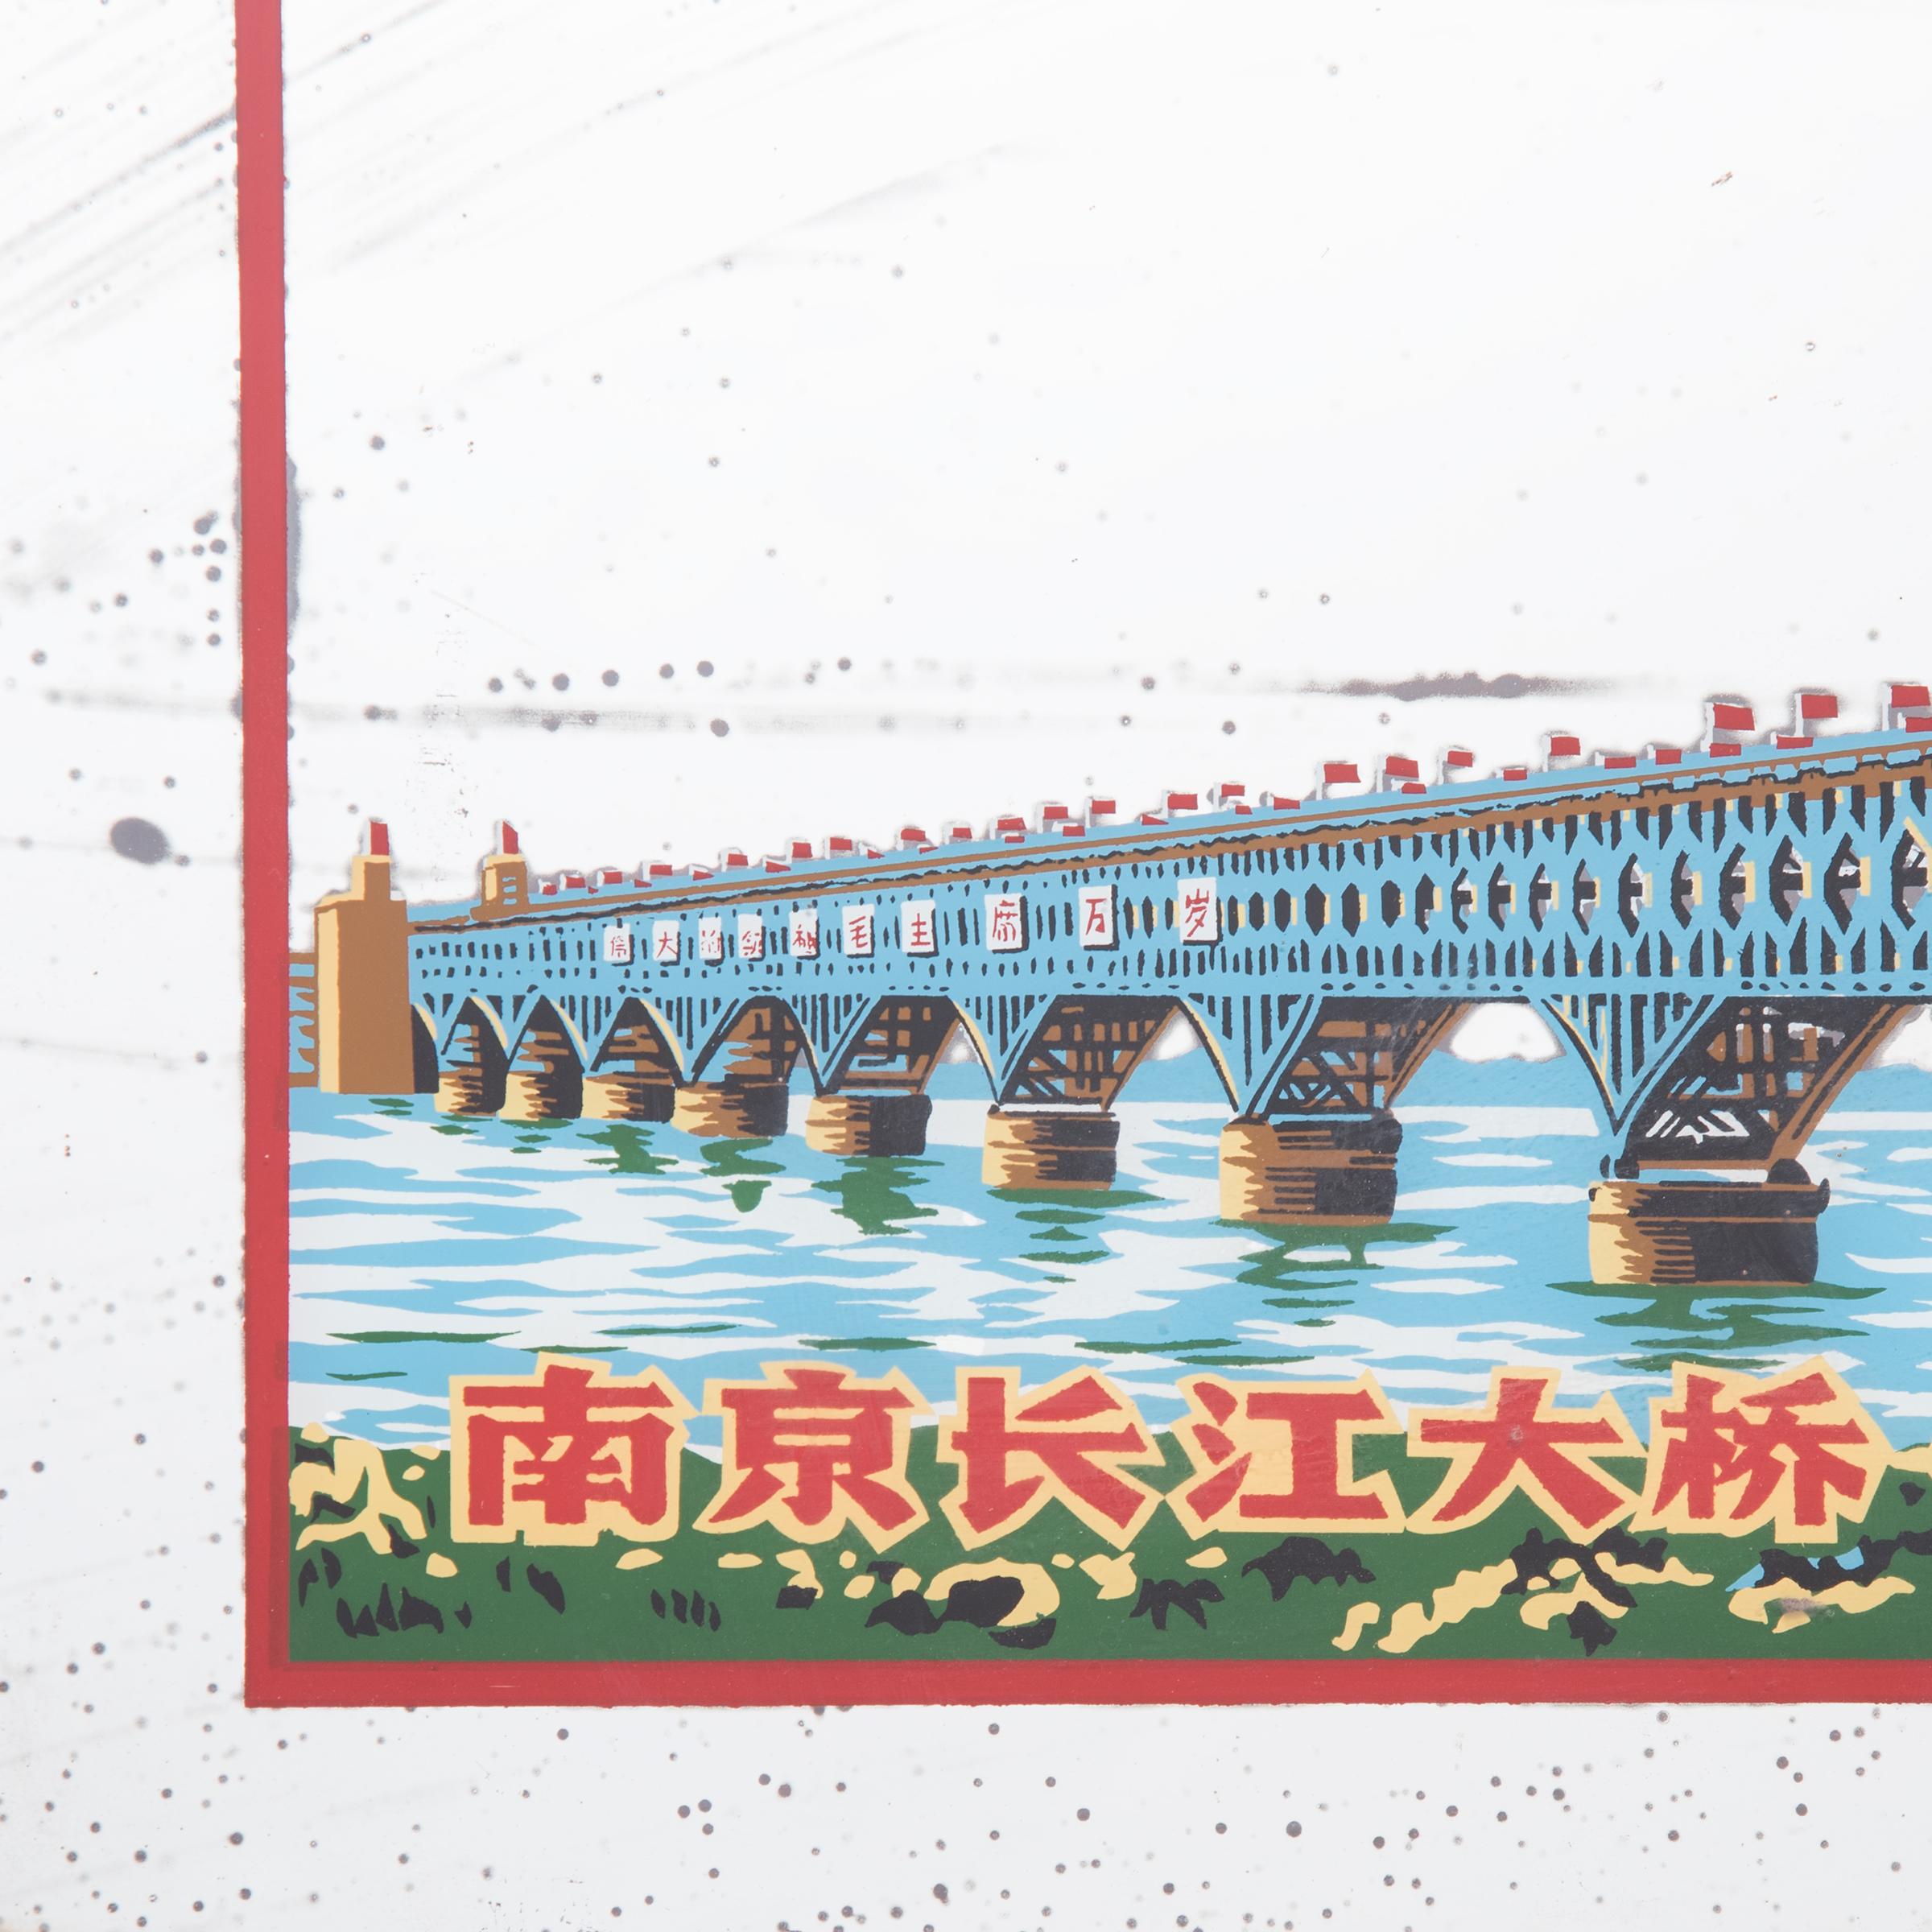 This cultural revolution-era reverse glass mirror painting depicts the Yangtze River Bridge, the first bridge designed and built solely by the Chinese and a great source of pride when it was completed in 1968. The traditional art of painting behind